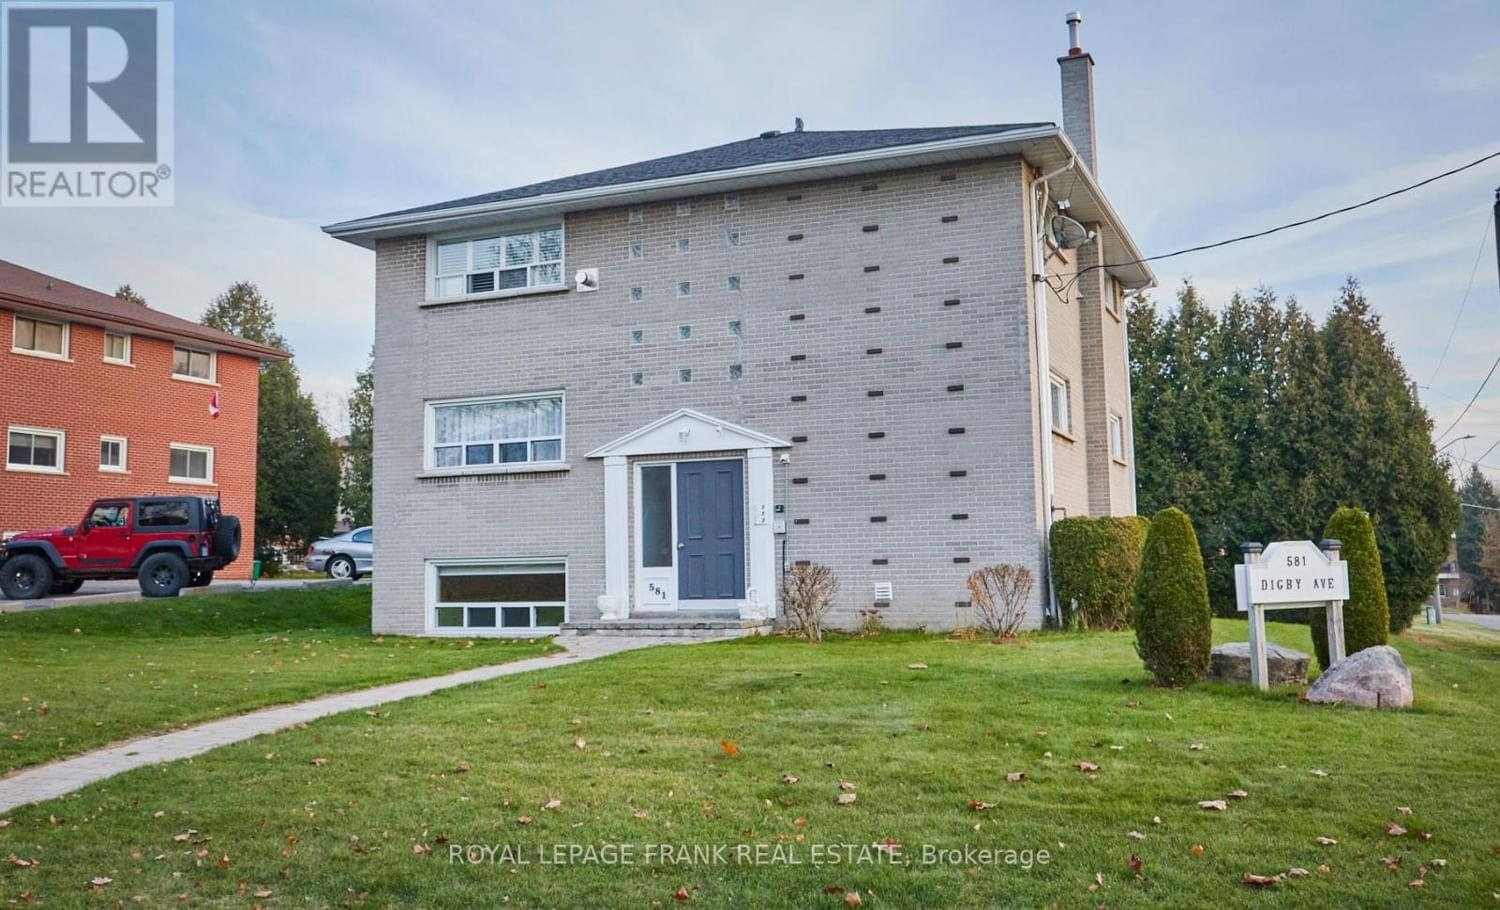 581 DIGBY AVENUE Image 7